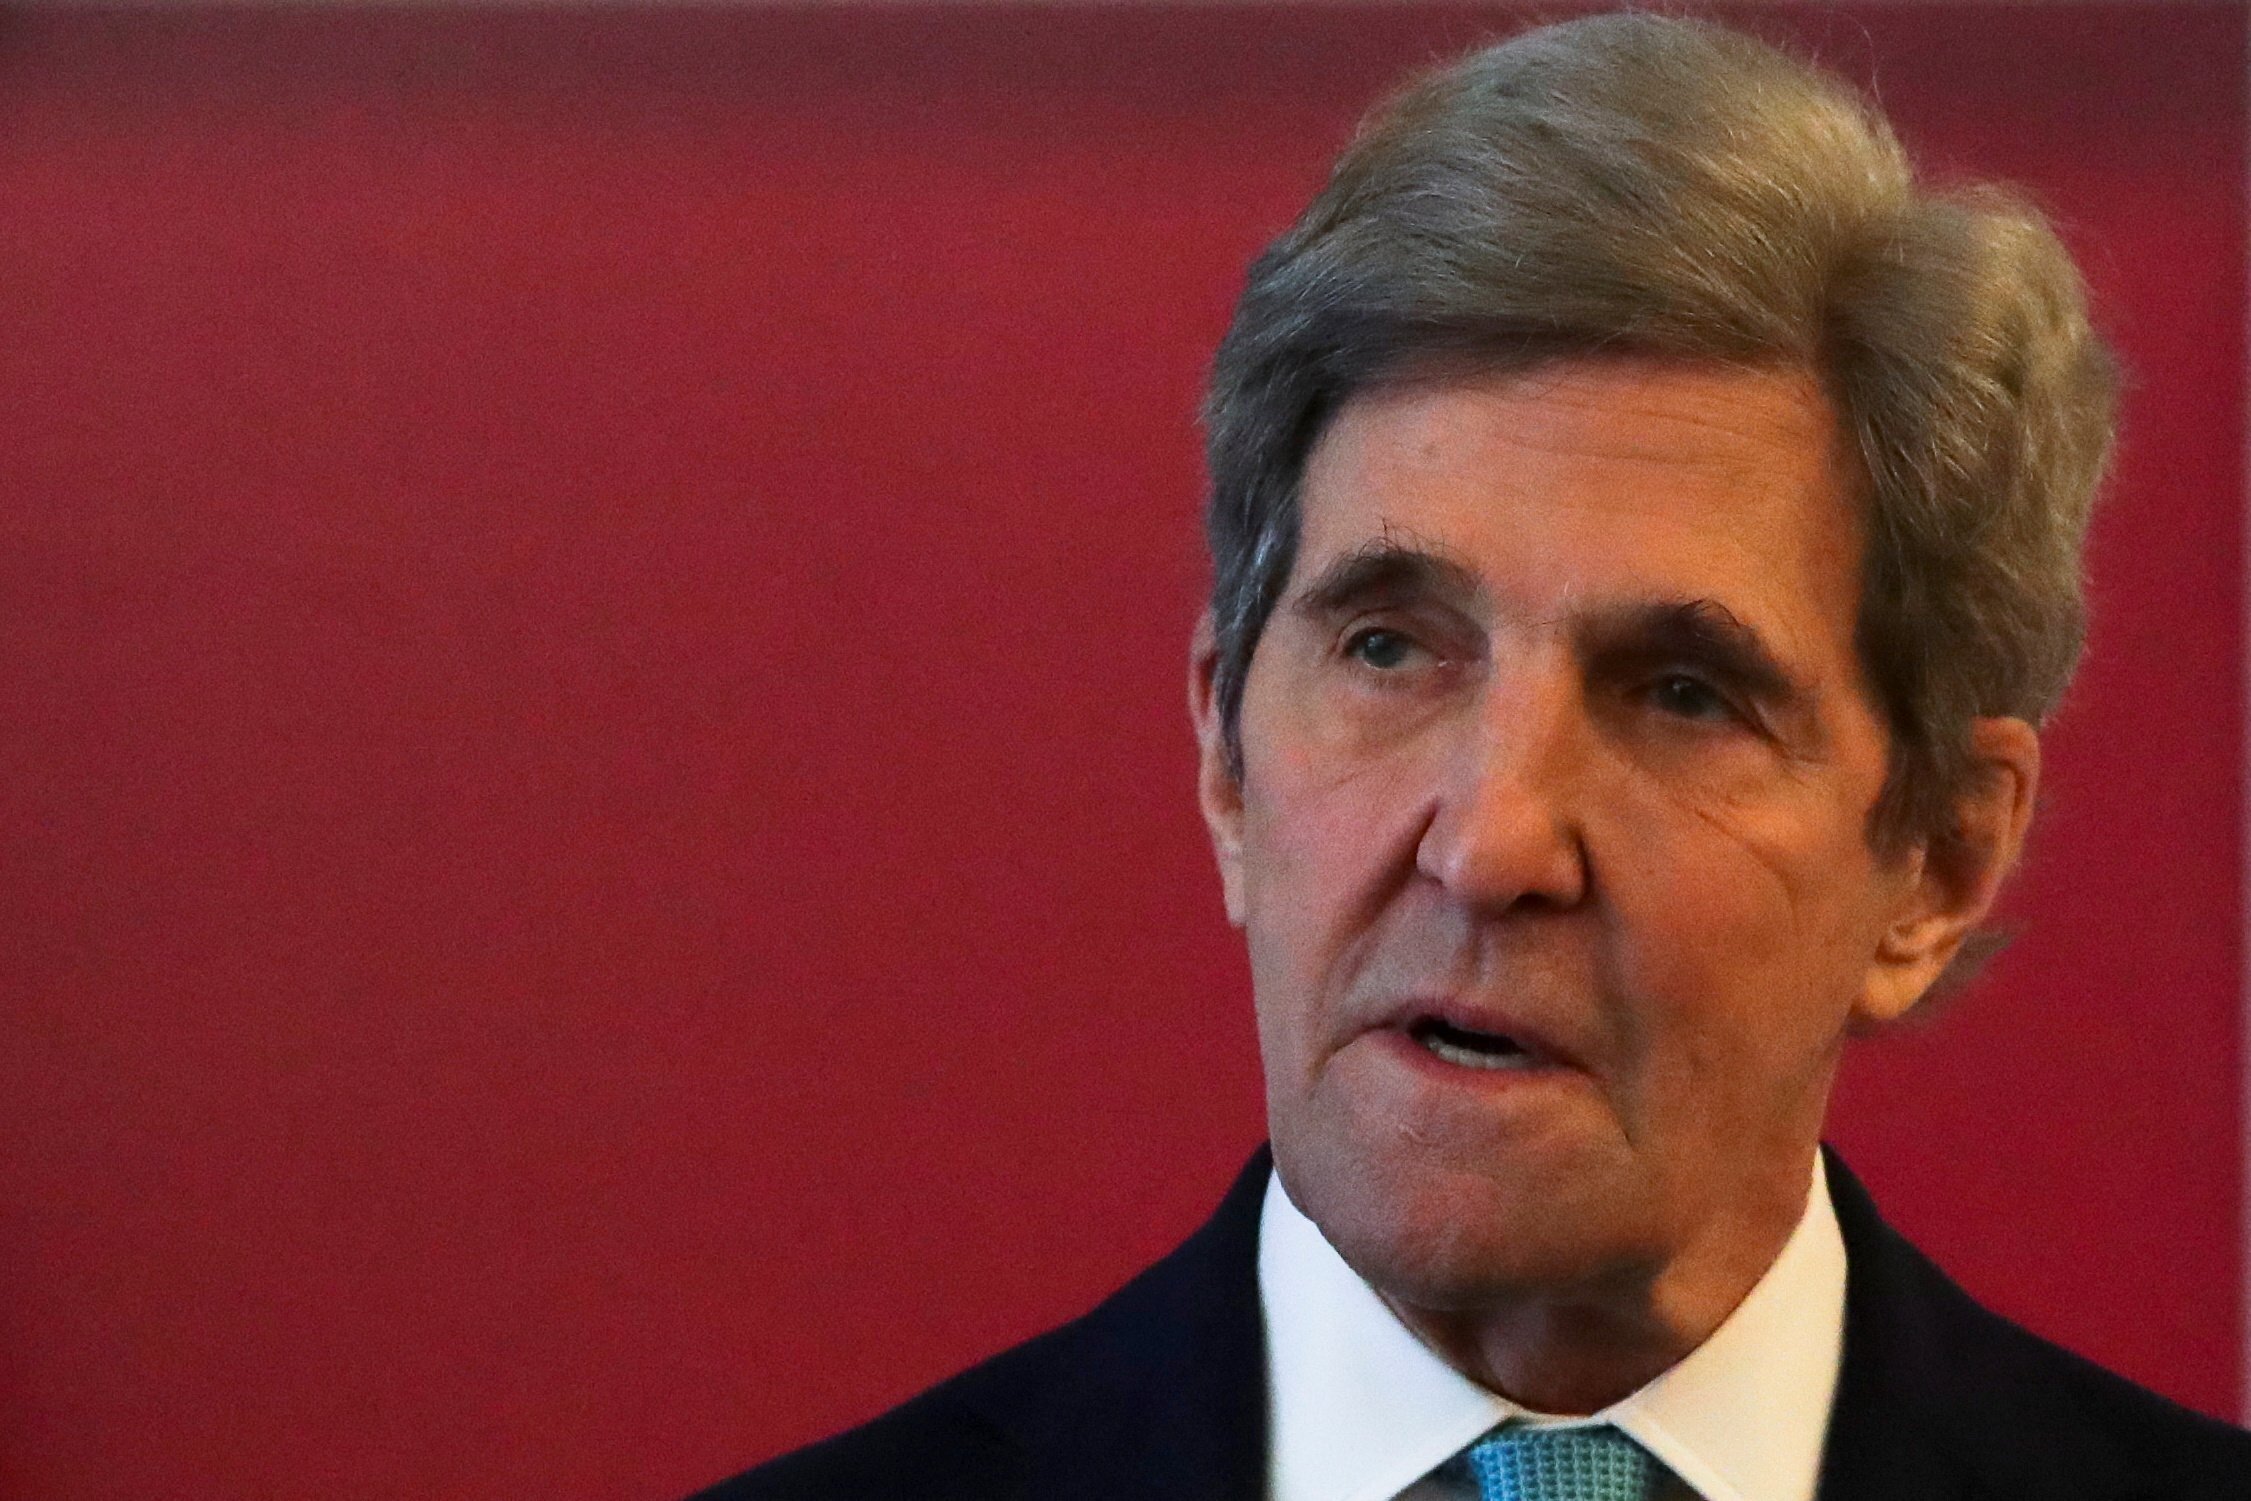 US Special Presidential Envoy for Climate John Kerry gives a speech in Mexico City, Mexico, in February. Photo: Reuters